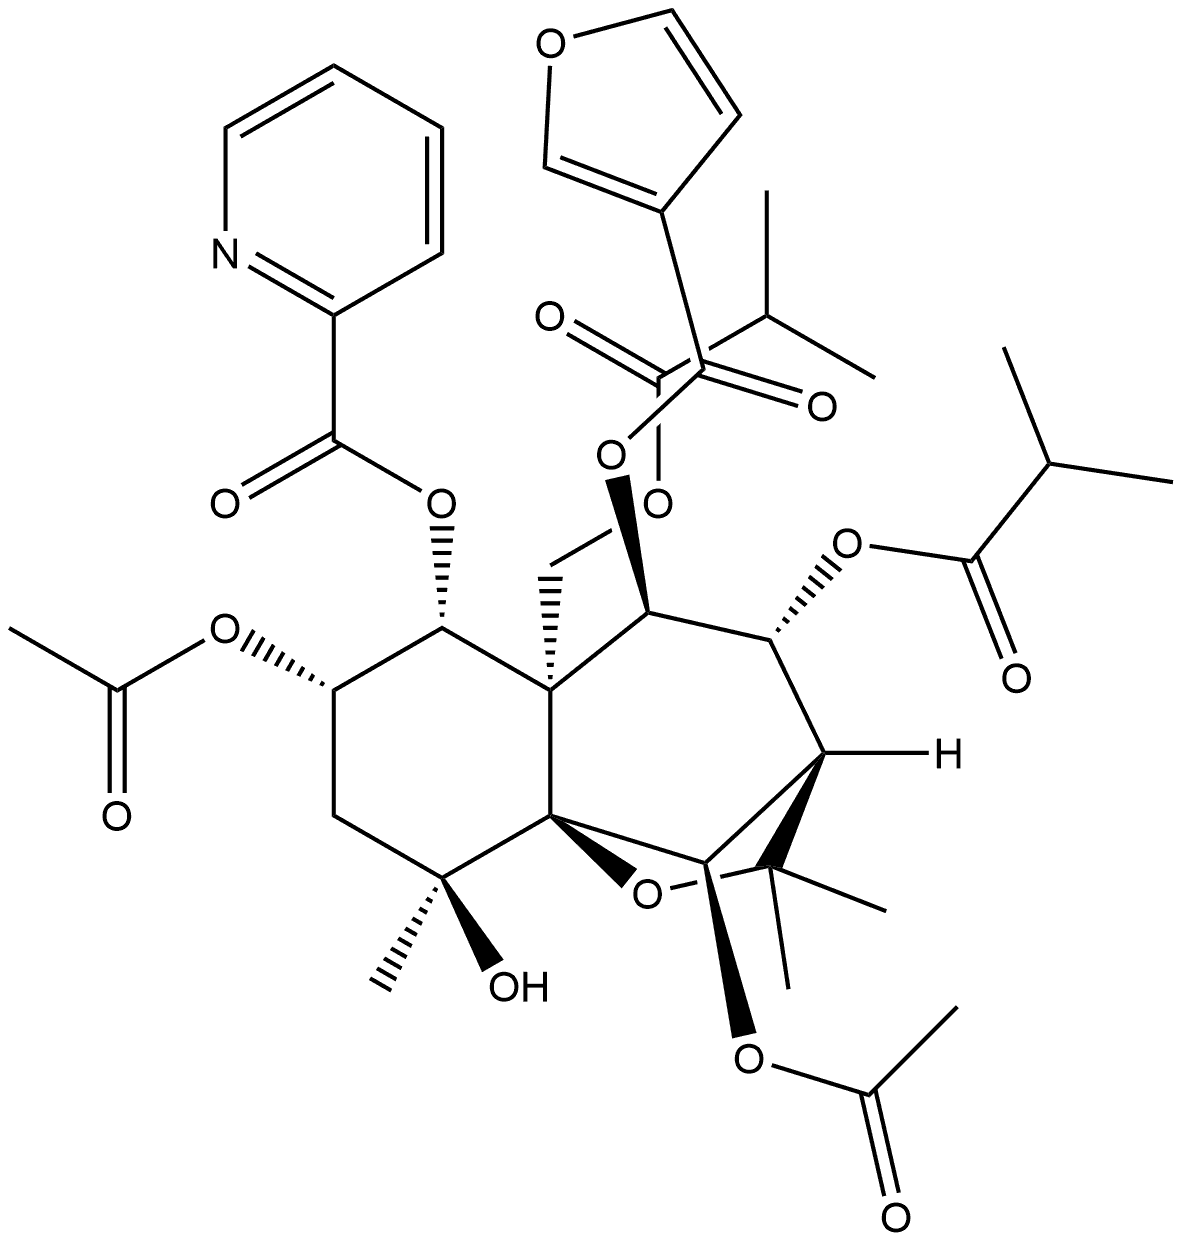 2-Pyridinecarboxylic acid, (3R,4R,5R,5aS,6R,7S,9S,9aS,10R)-7,10-bis(acetyloxy)-5-[(3-furanylcarbonyl)oxy]octahydro-9-hydroxy-2,2,9-trimethyl-4-(2-methyl-1-oxopropoxy)-5a-[(2-methyl-1-oxopropoxy)methyl]-2H-3,9a-methano-1-benzoxepin-6-yl ester 化学構造式